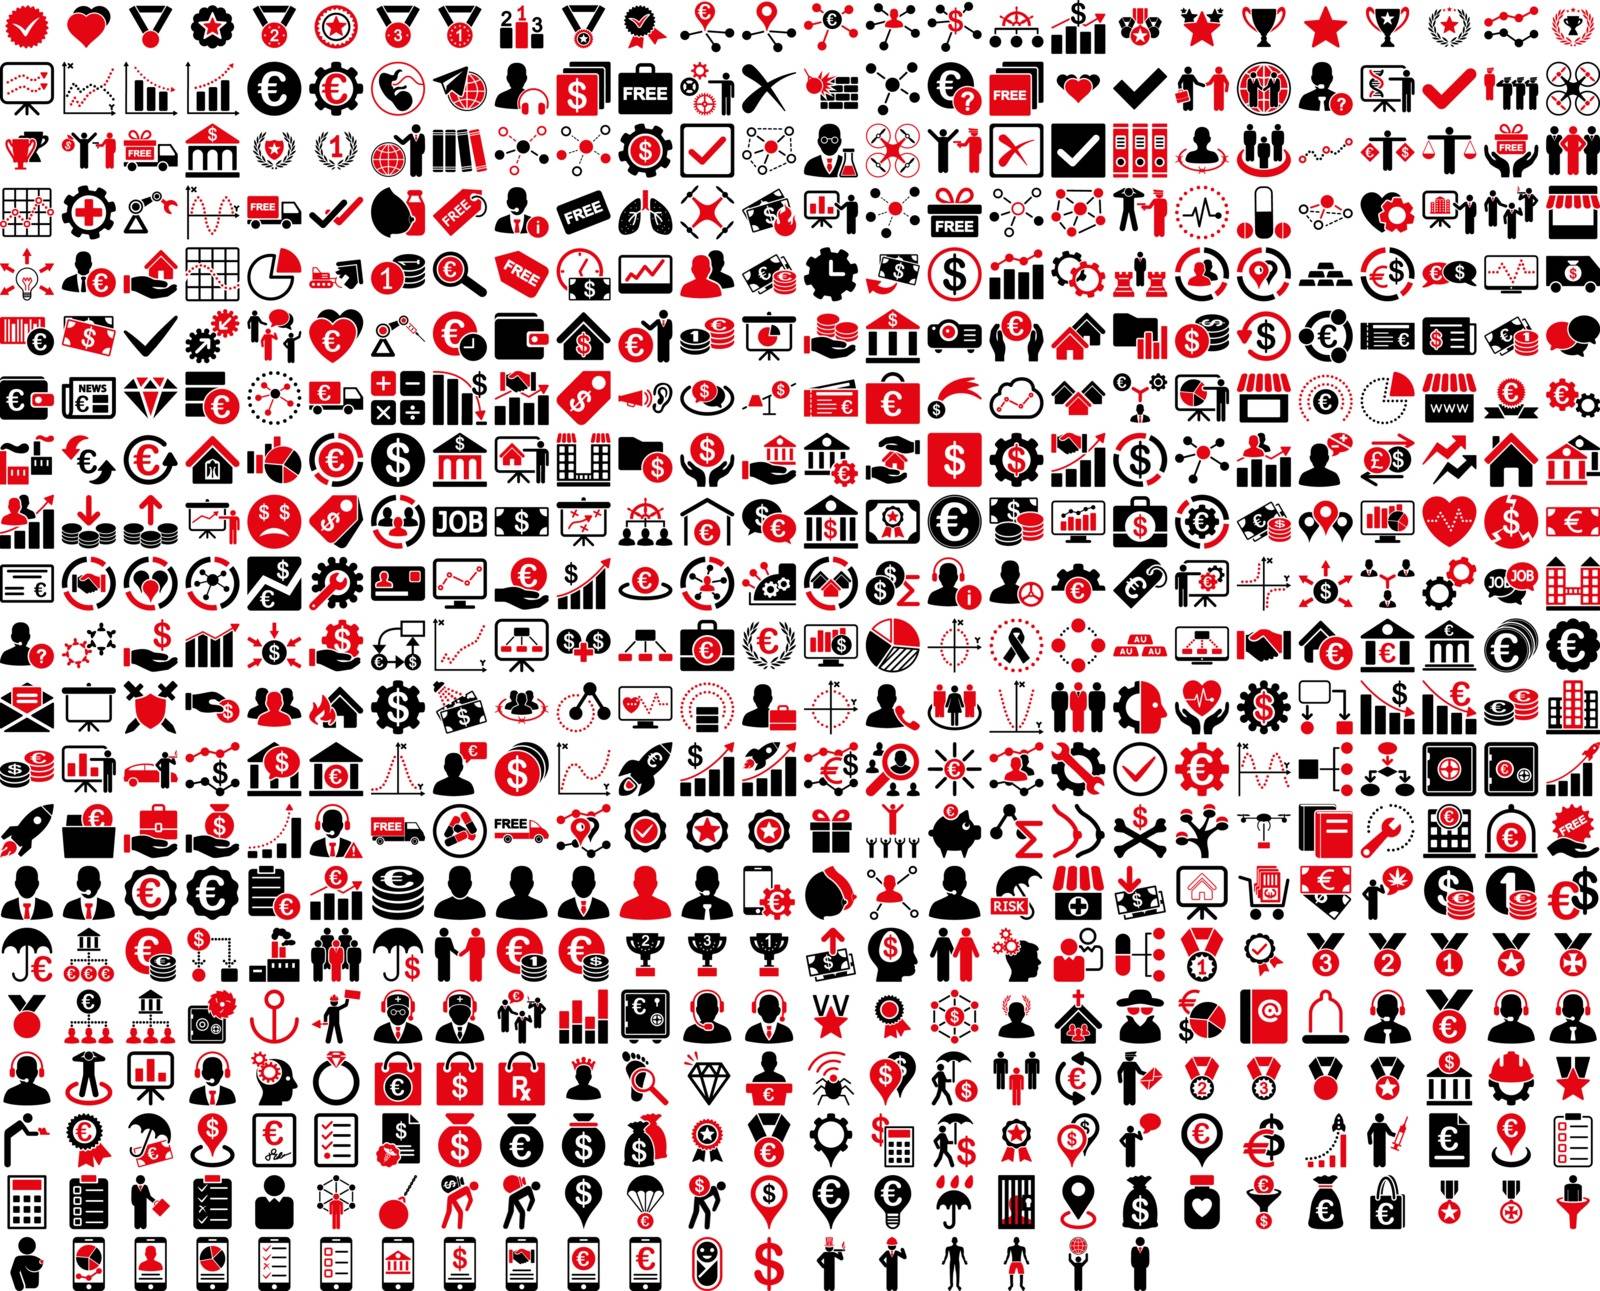 Application Toolbar Icons. 576 flat bicolor icons use intensive red and black colors. Vector images are isolated on a white background. 